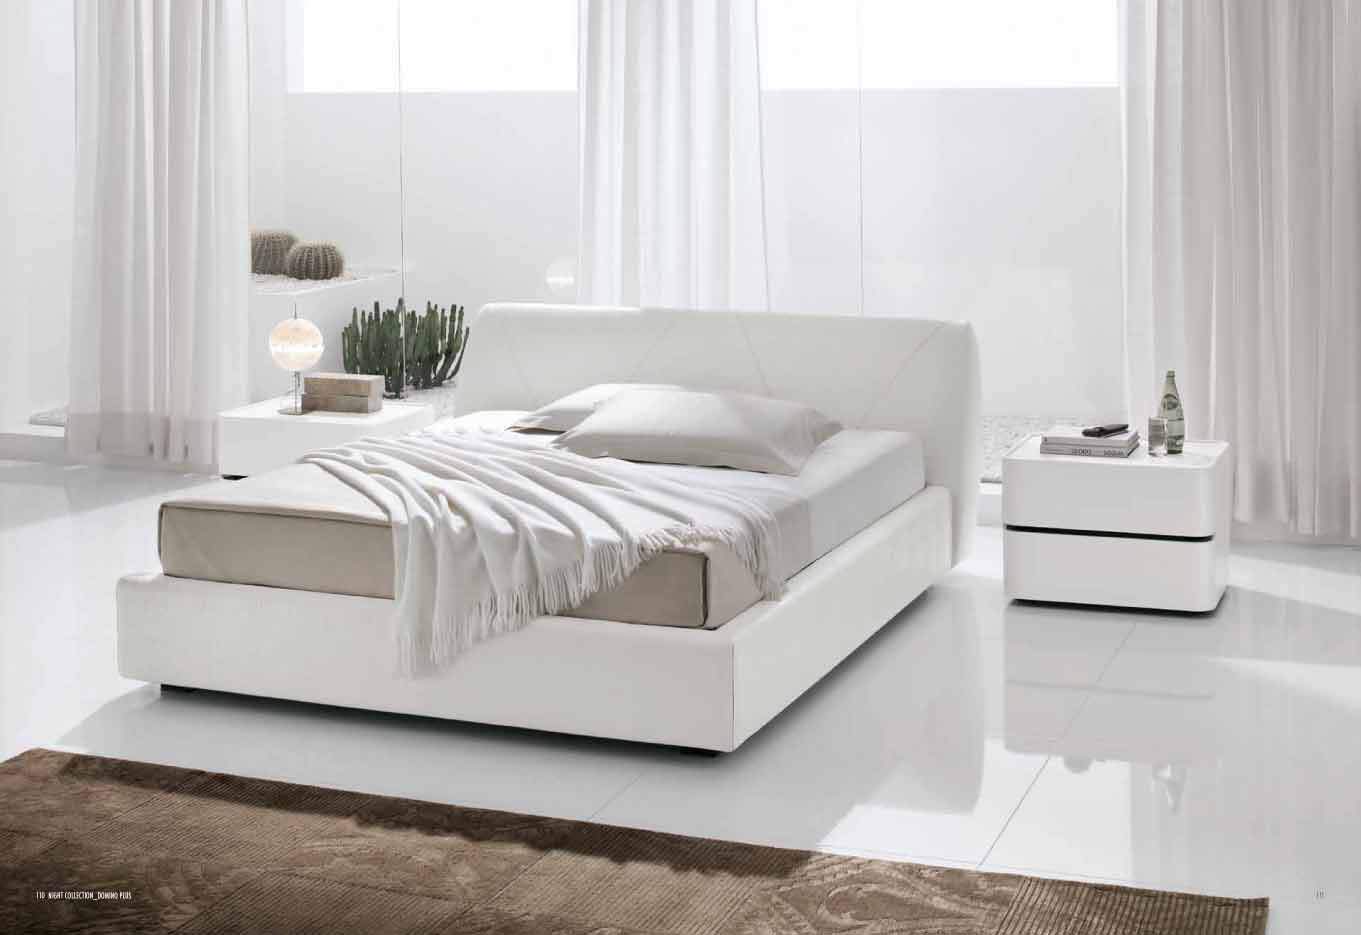 Made in Italy Leather Bedroom Design with Extra Storage ...